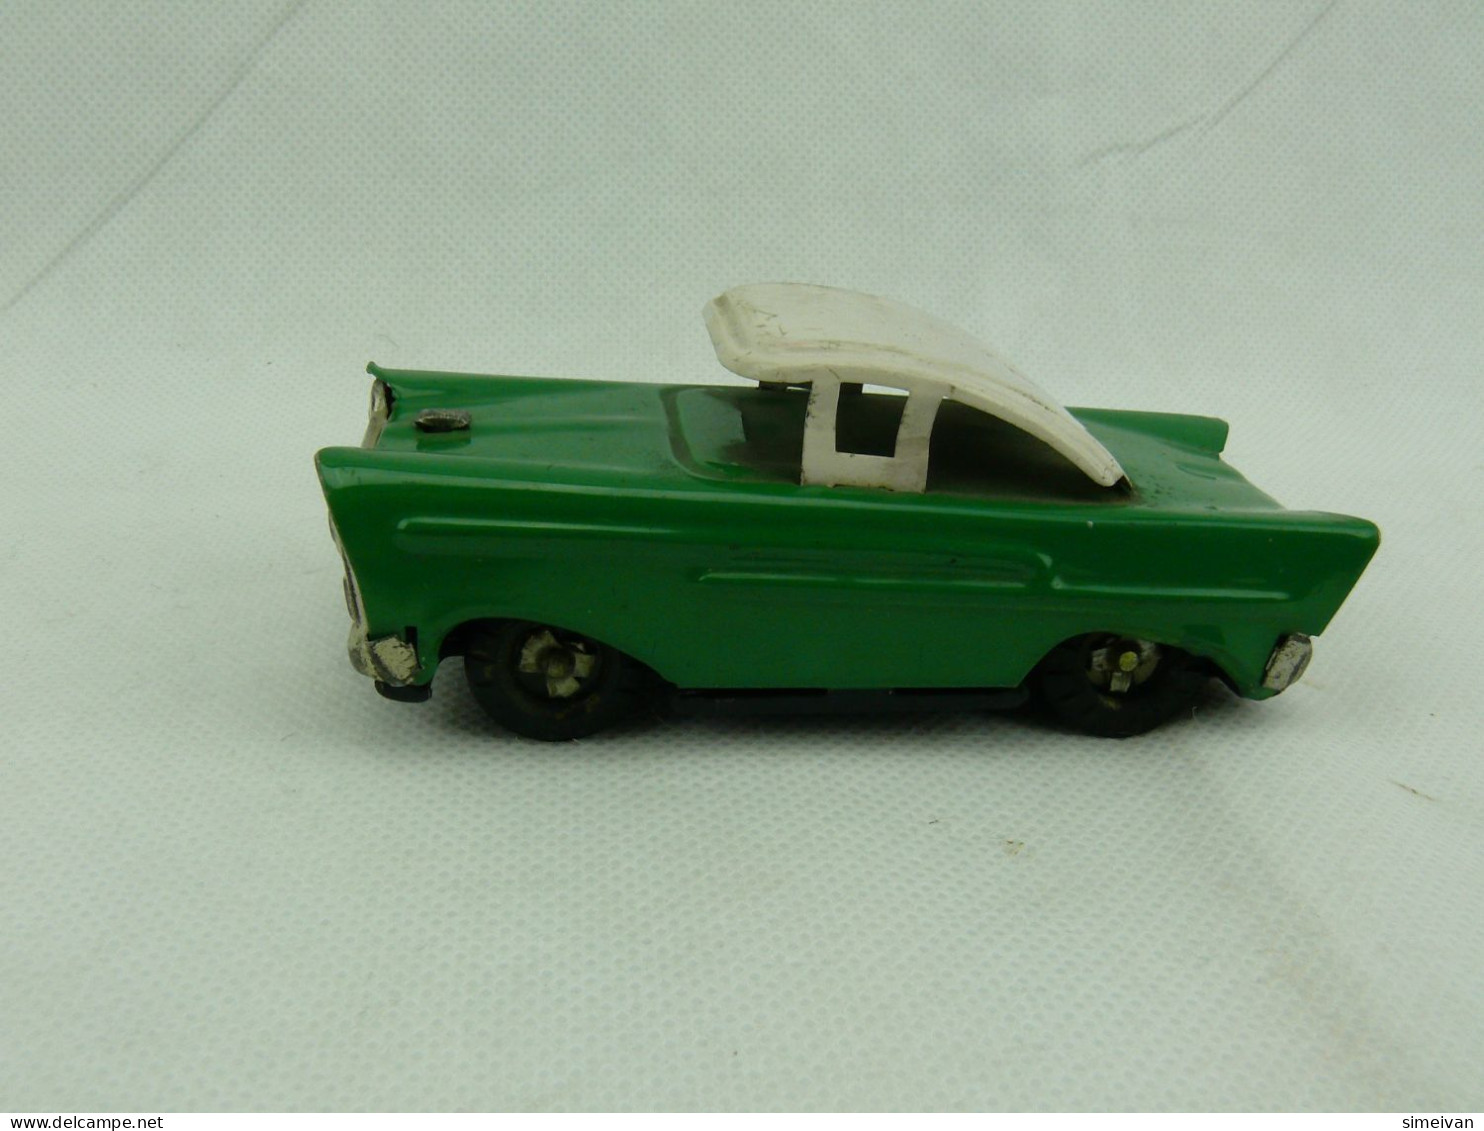 VINTAGE RARE TIN TOY FRICTION CAR 1960's MADE IN CHINA #2388 - Jugetes Antiguos